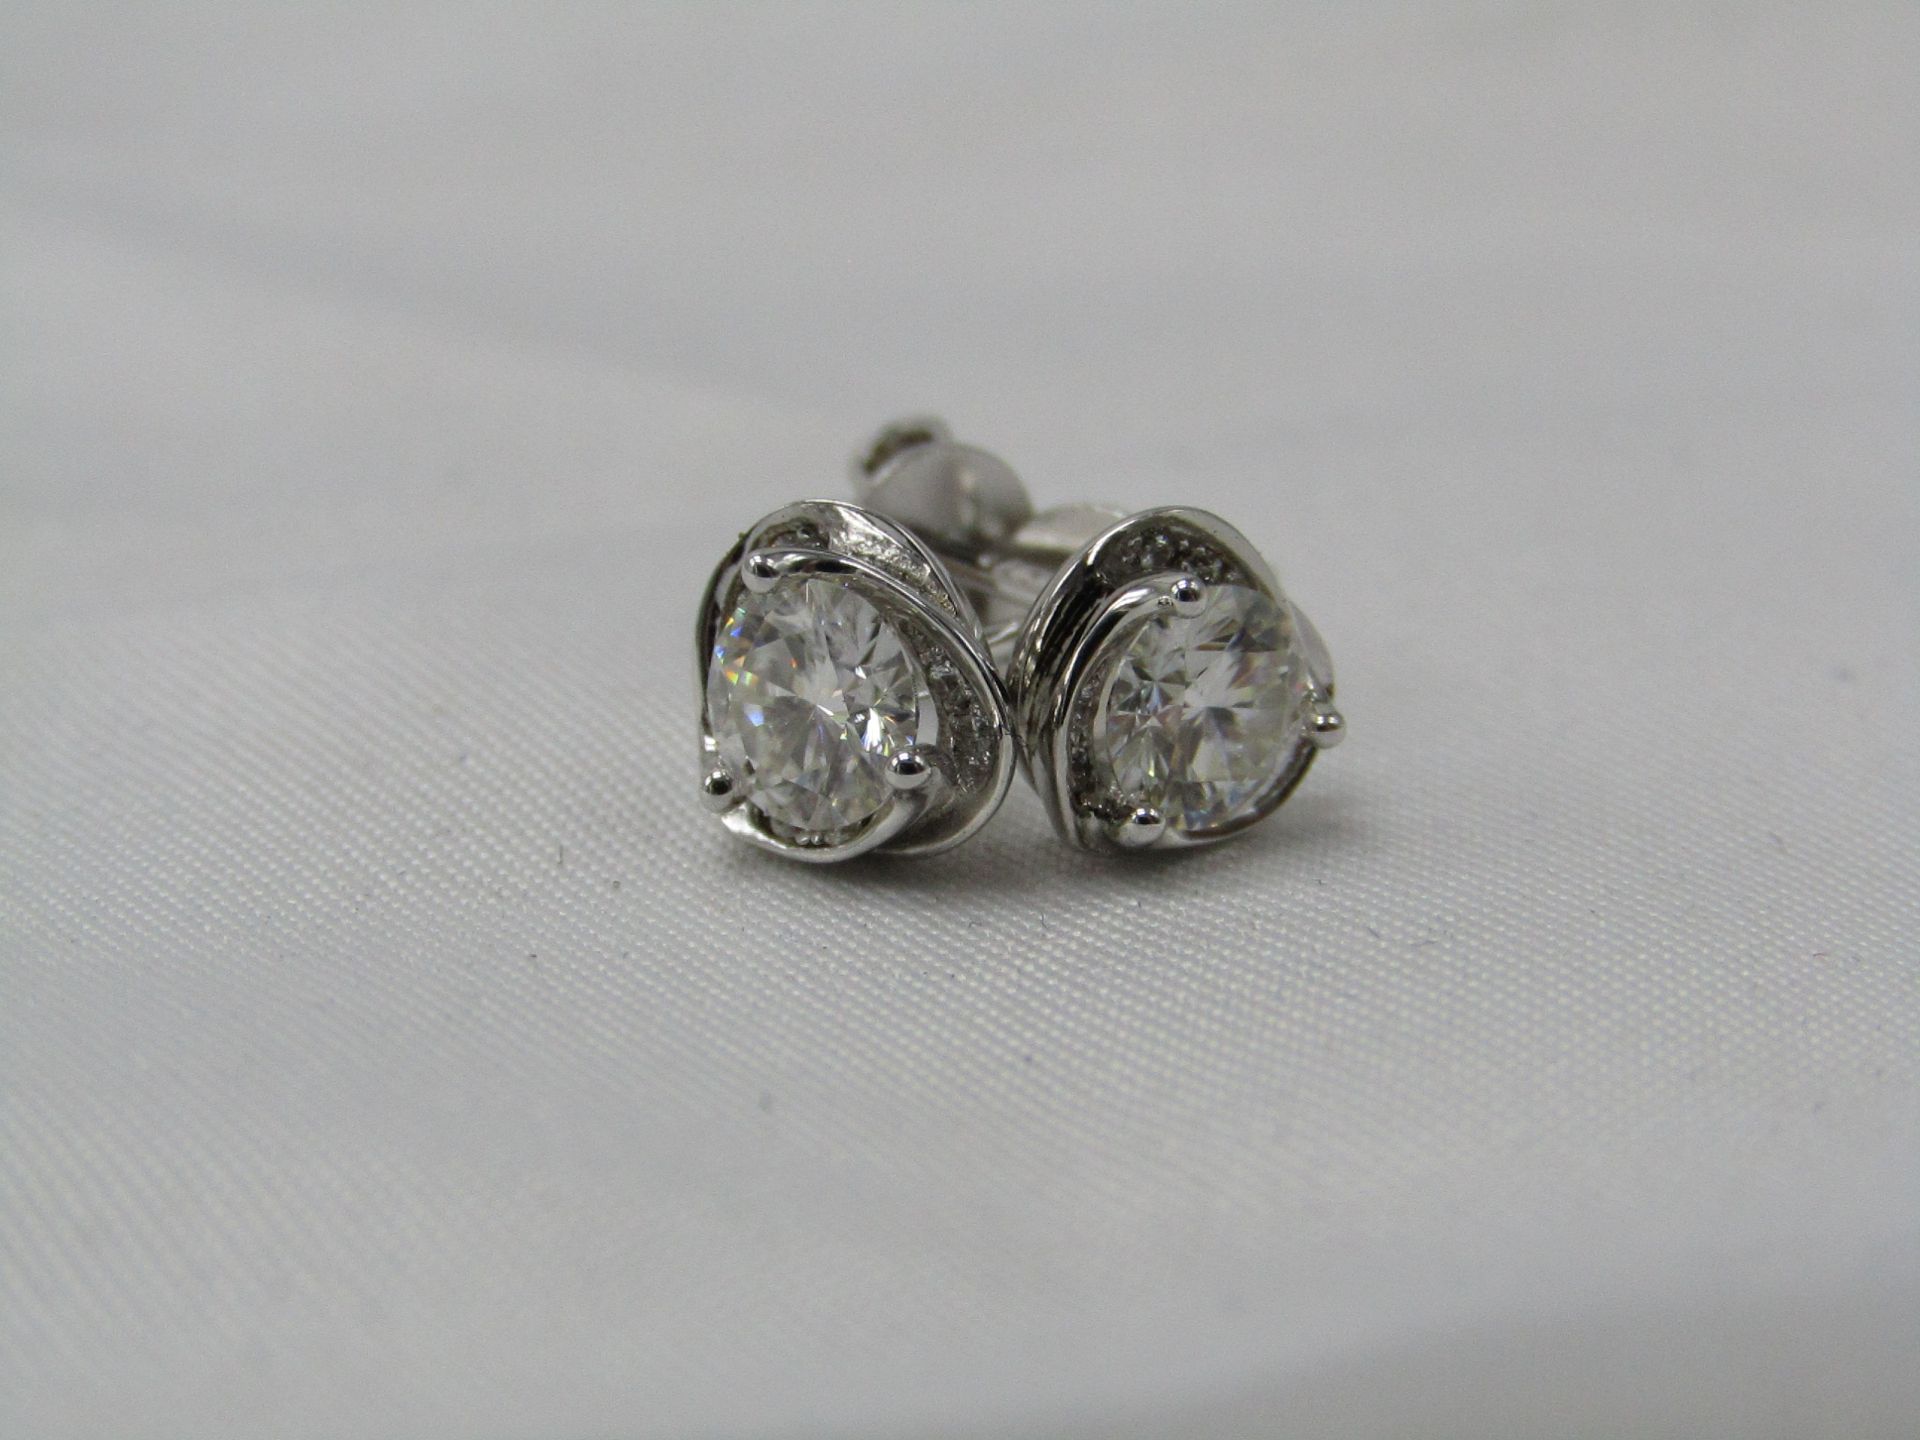 0.5 Carat Round Brilliant Cut Moissanite stone in a 925 Silver setting earrings, new and comes